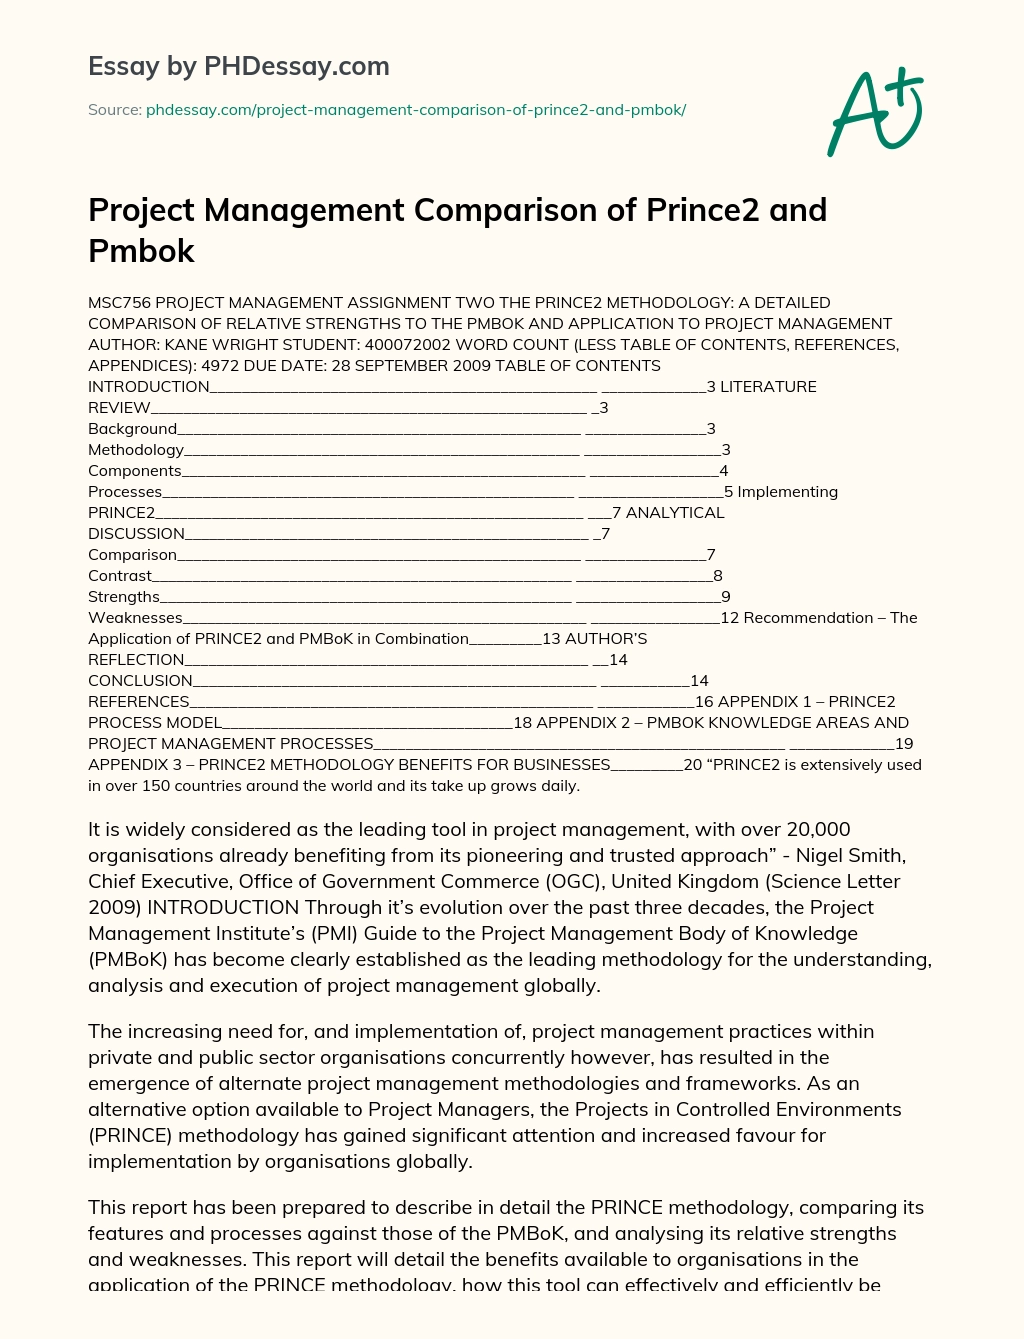 Project Management Comparison of Prince2 and Pmbok essay